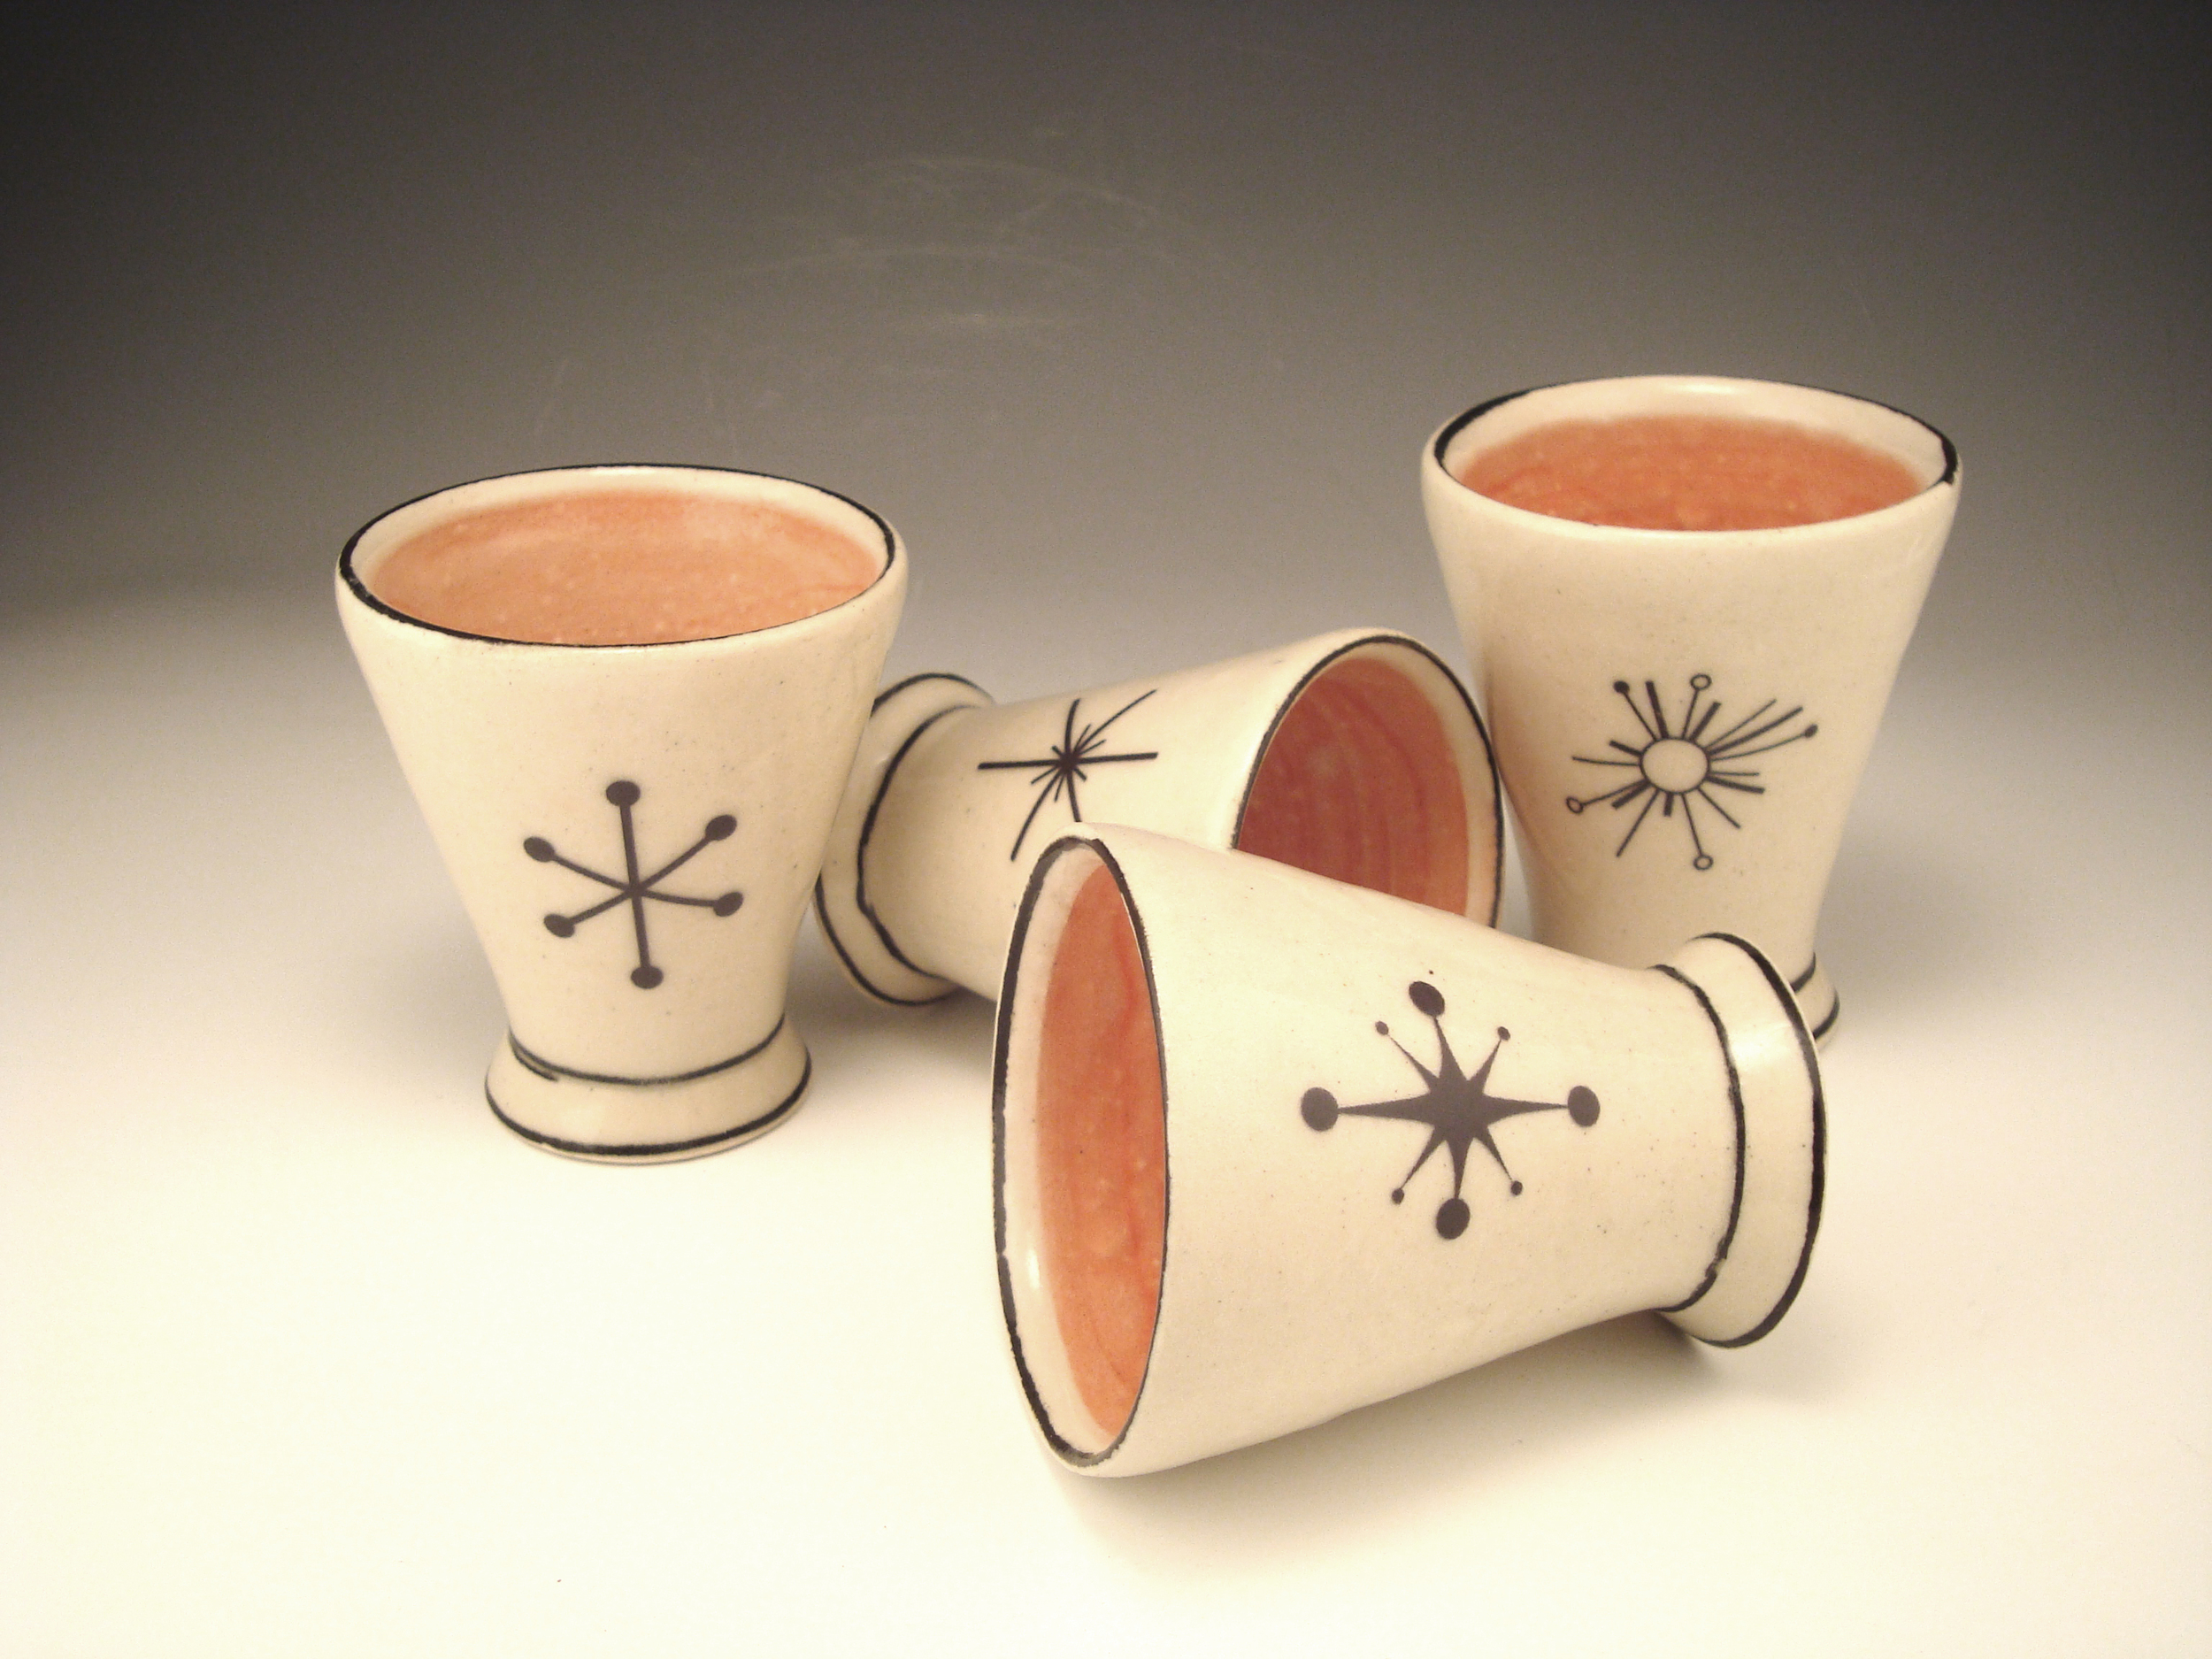 Four-star toasting cups